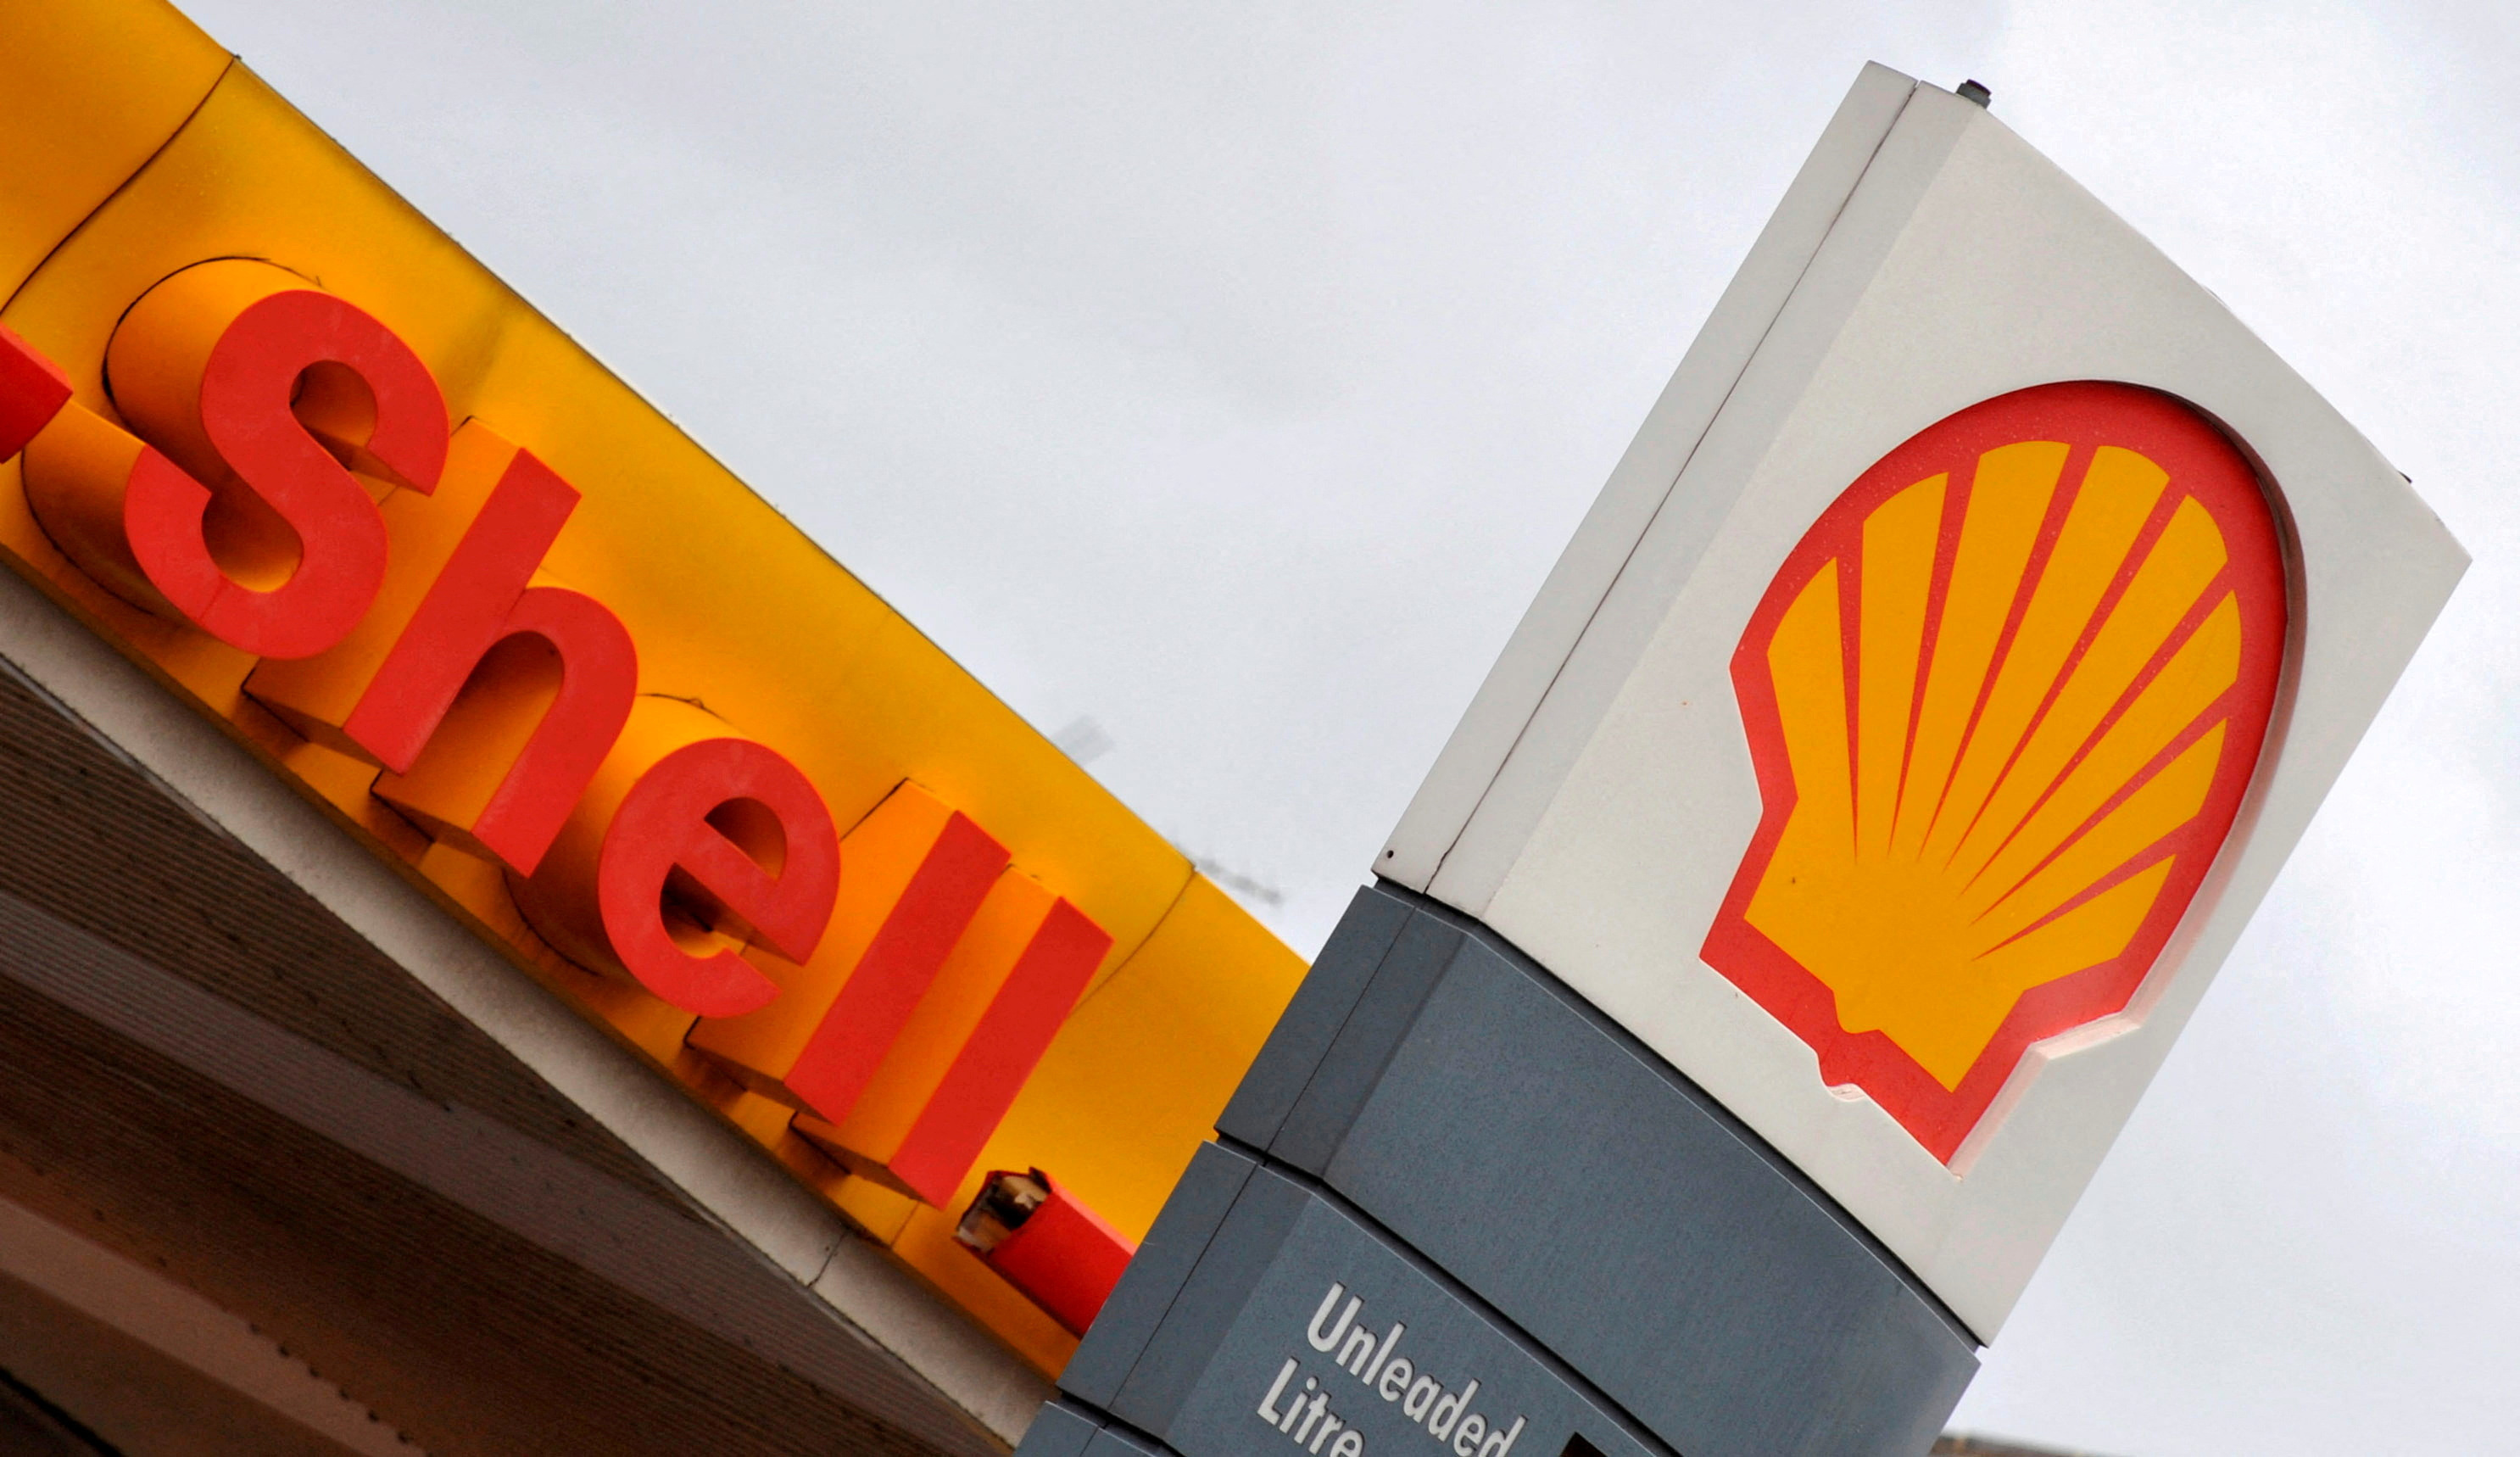 The Shell logo is seen at a Shell petrol station in London